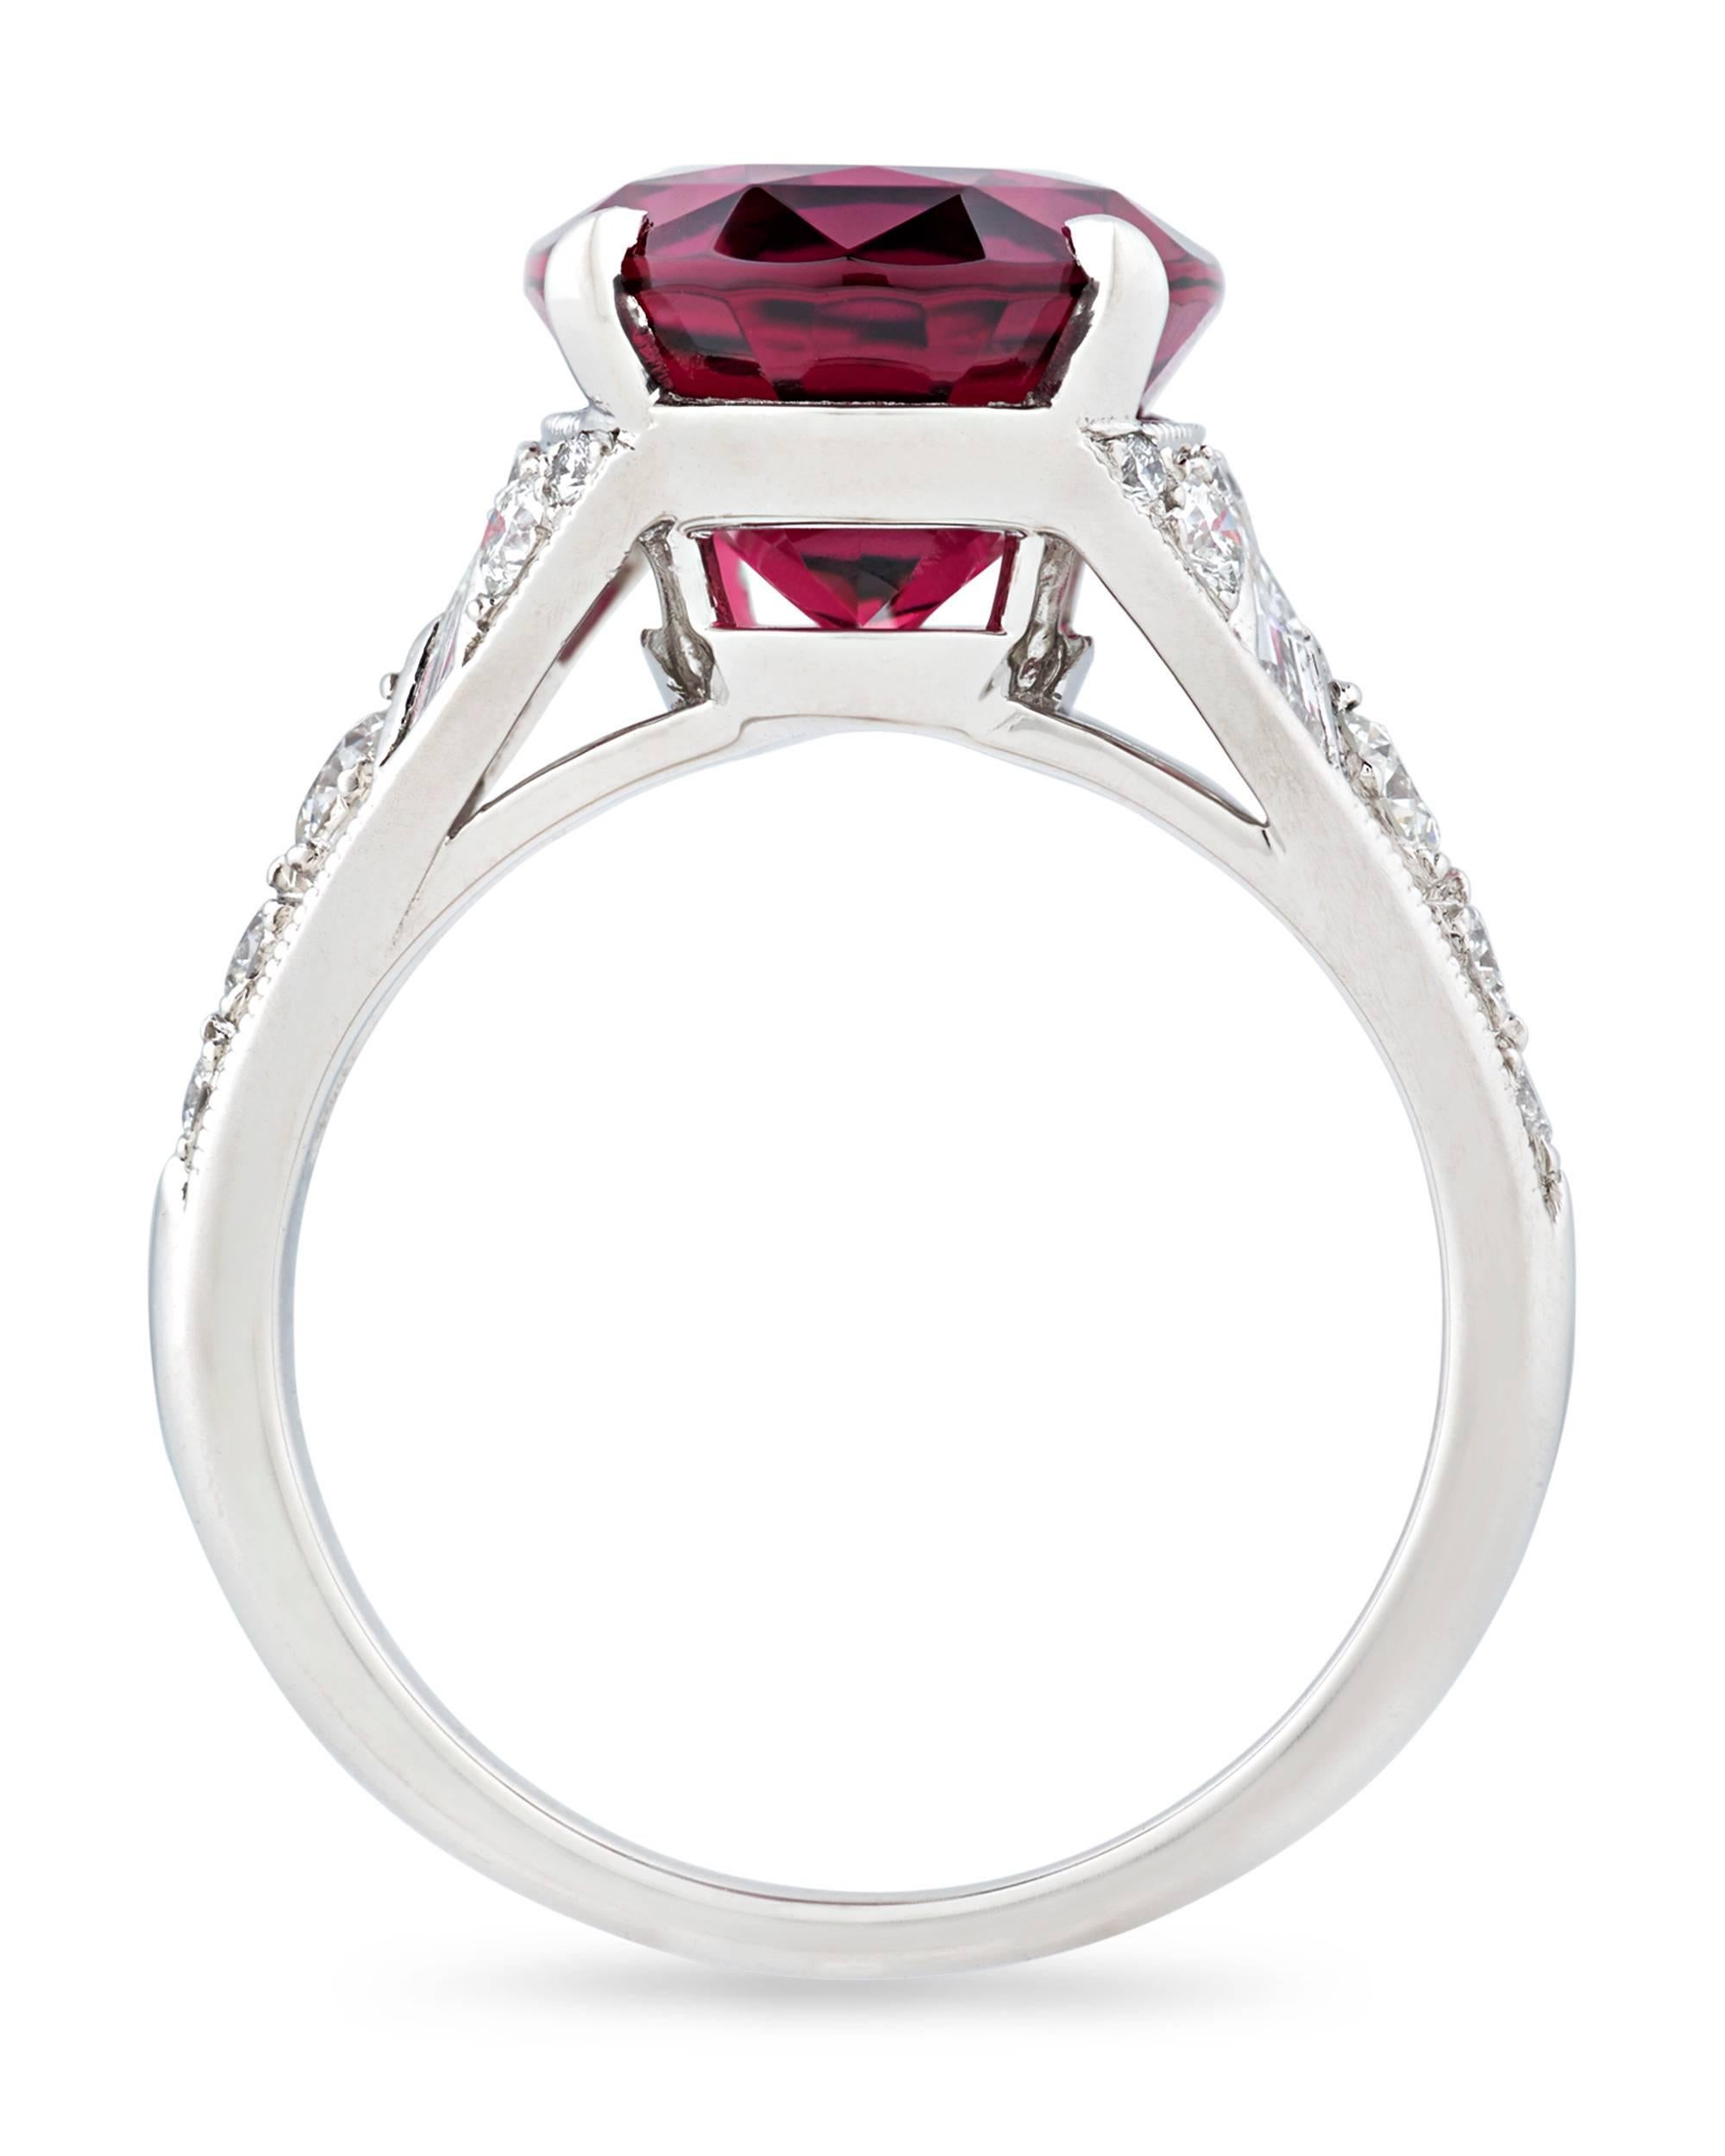 Tiffany and Co. 6.07 Carat Rubellite Tourmaline Ring at 1stDibs ...